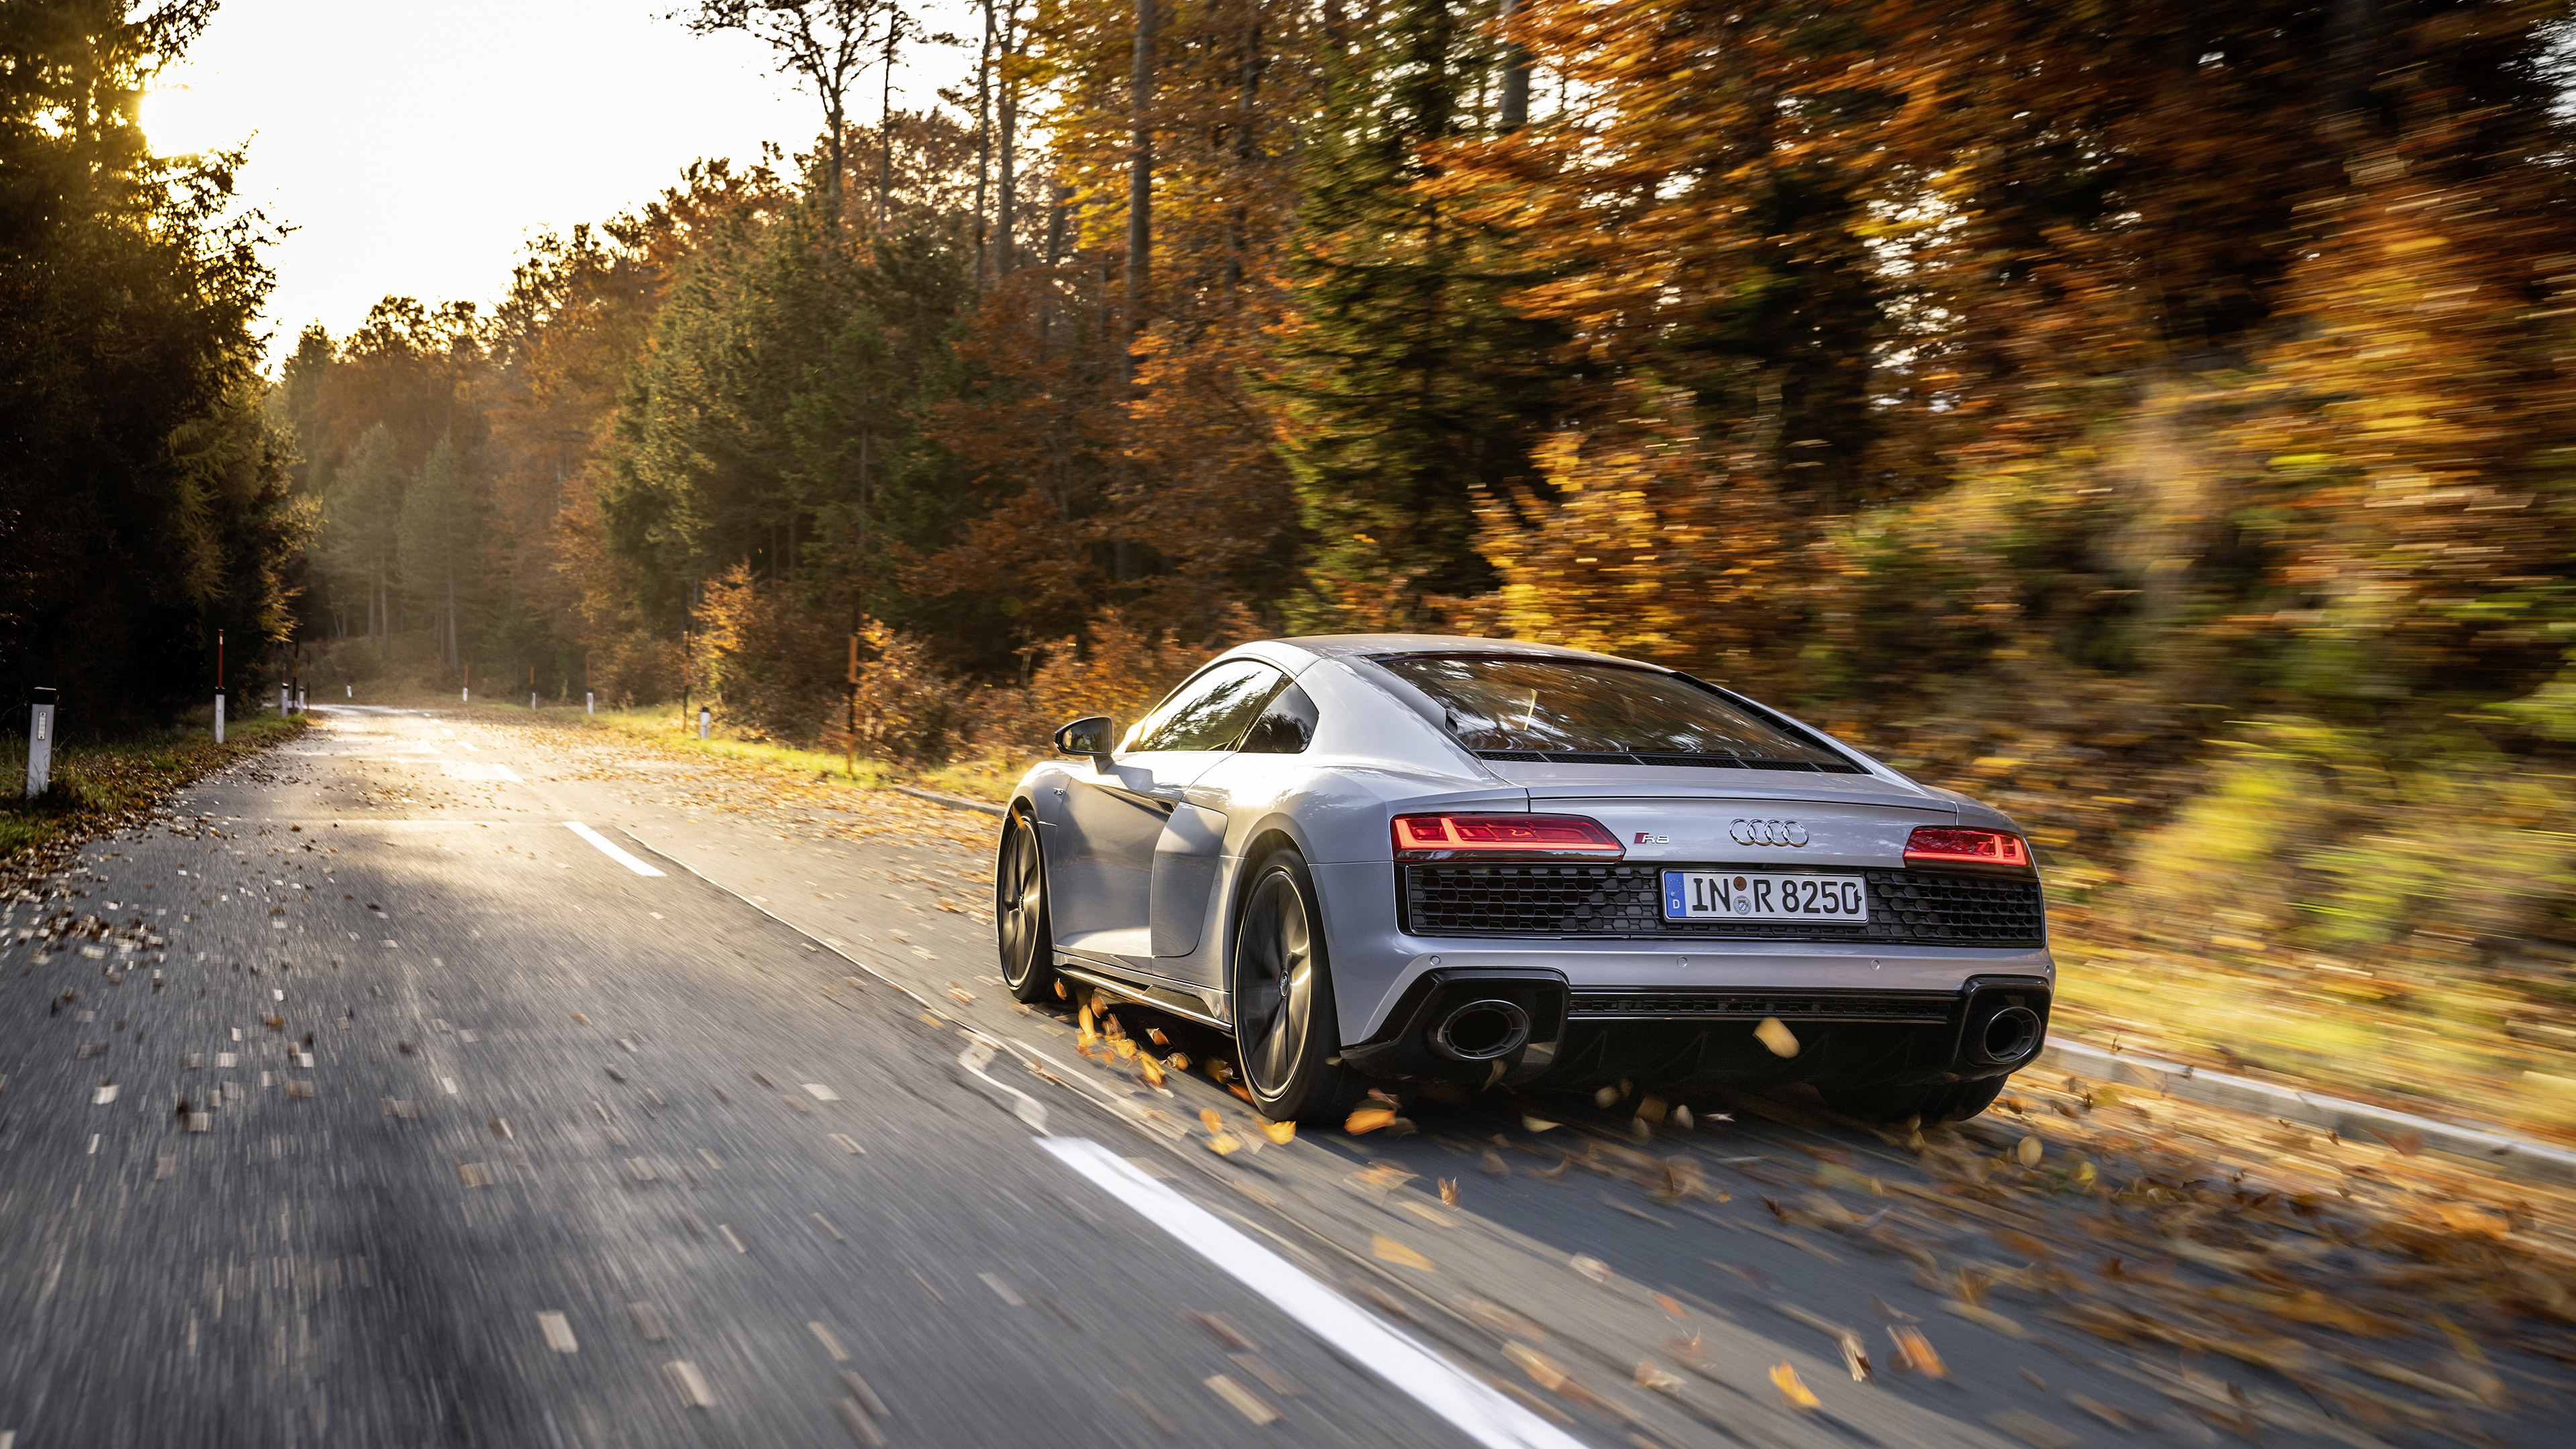 General 3840x2160 Audi R8 car vehicle road motion blur forest Audi supercars German cars Volkswagen Group